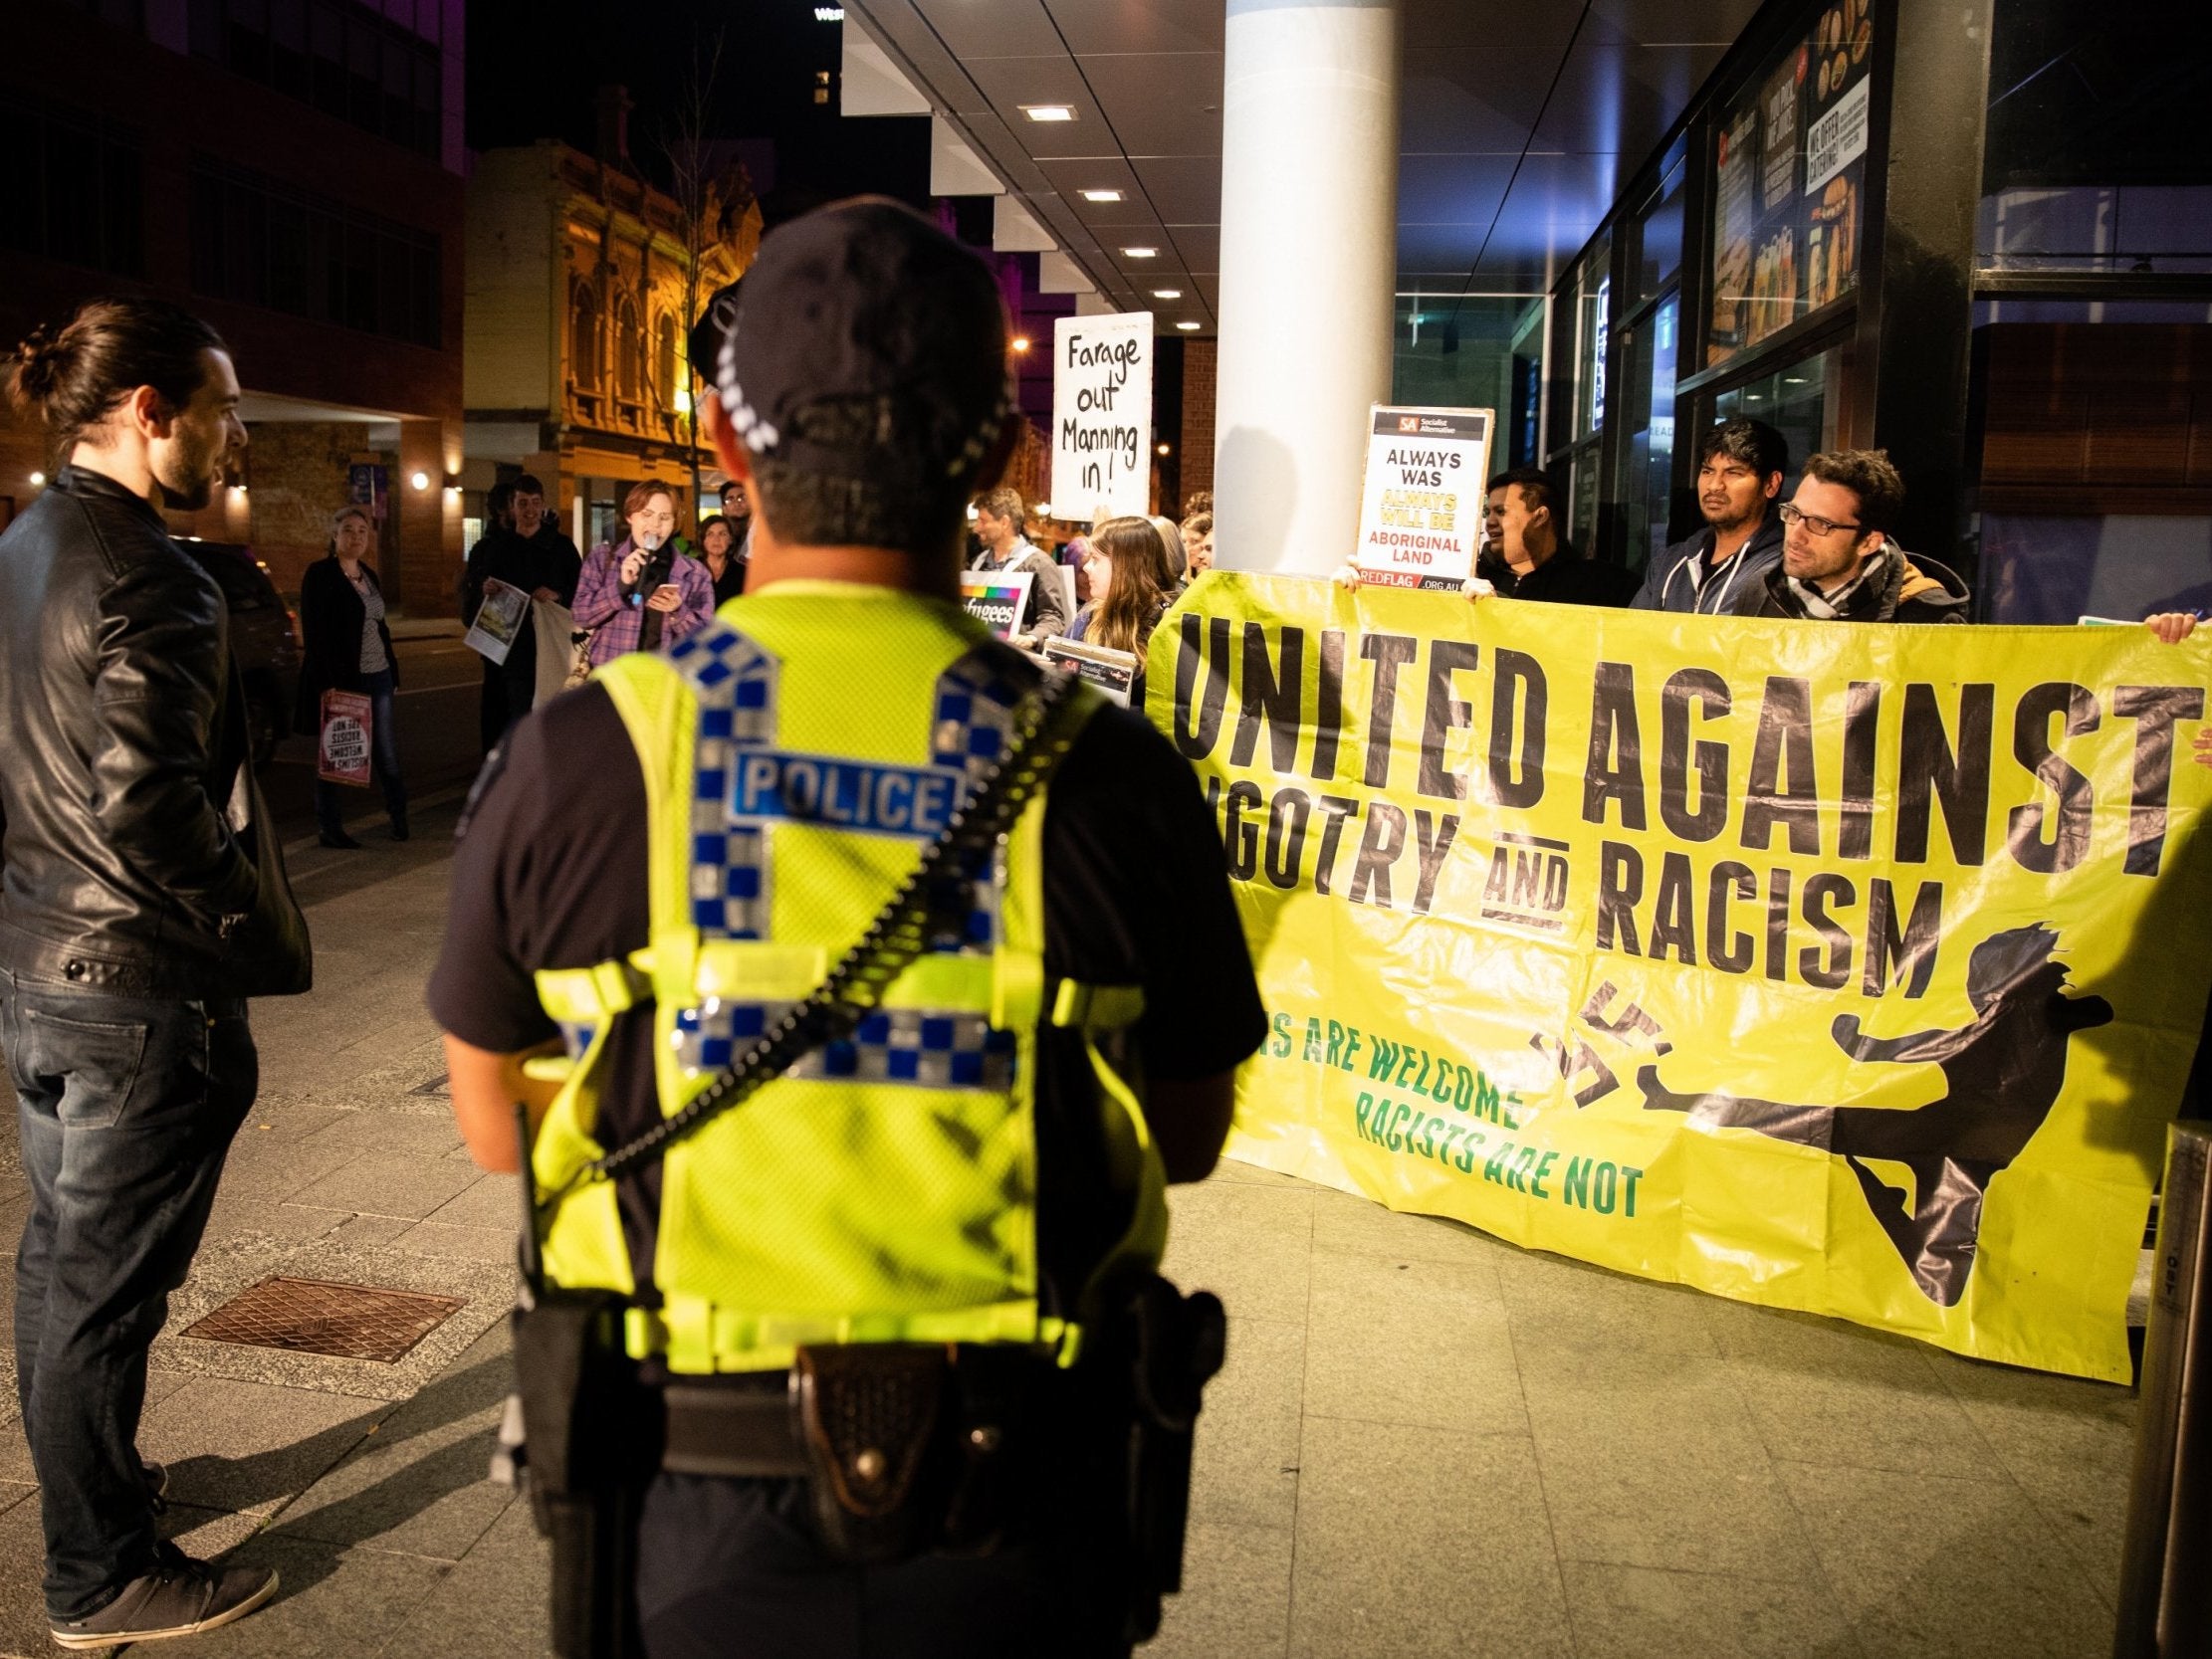 Police watch over protesters outside a venue hosting Nigel Farage in Perth, Australia